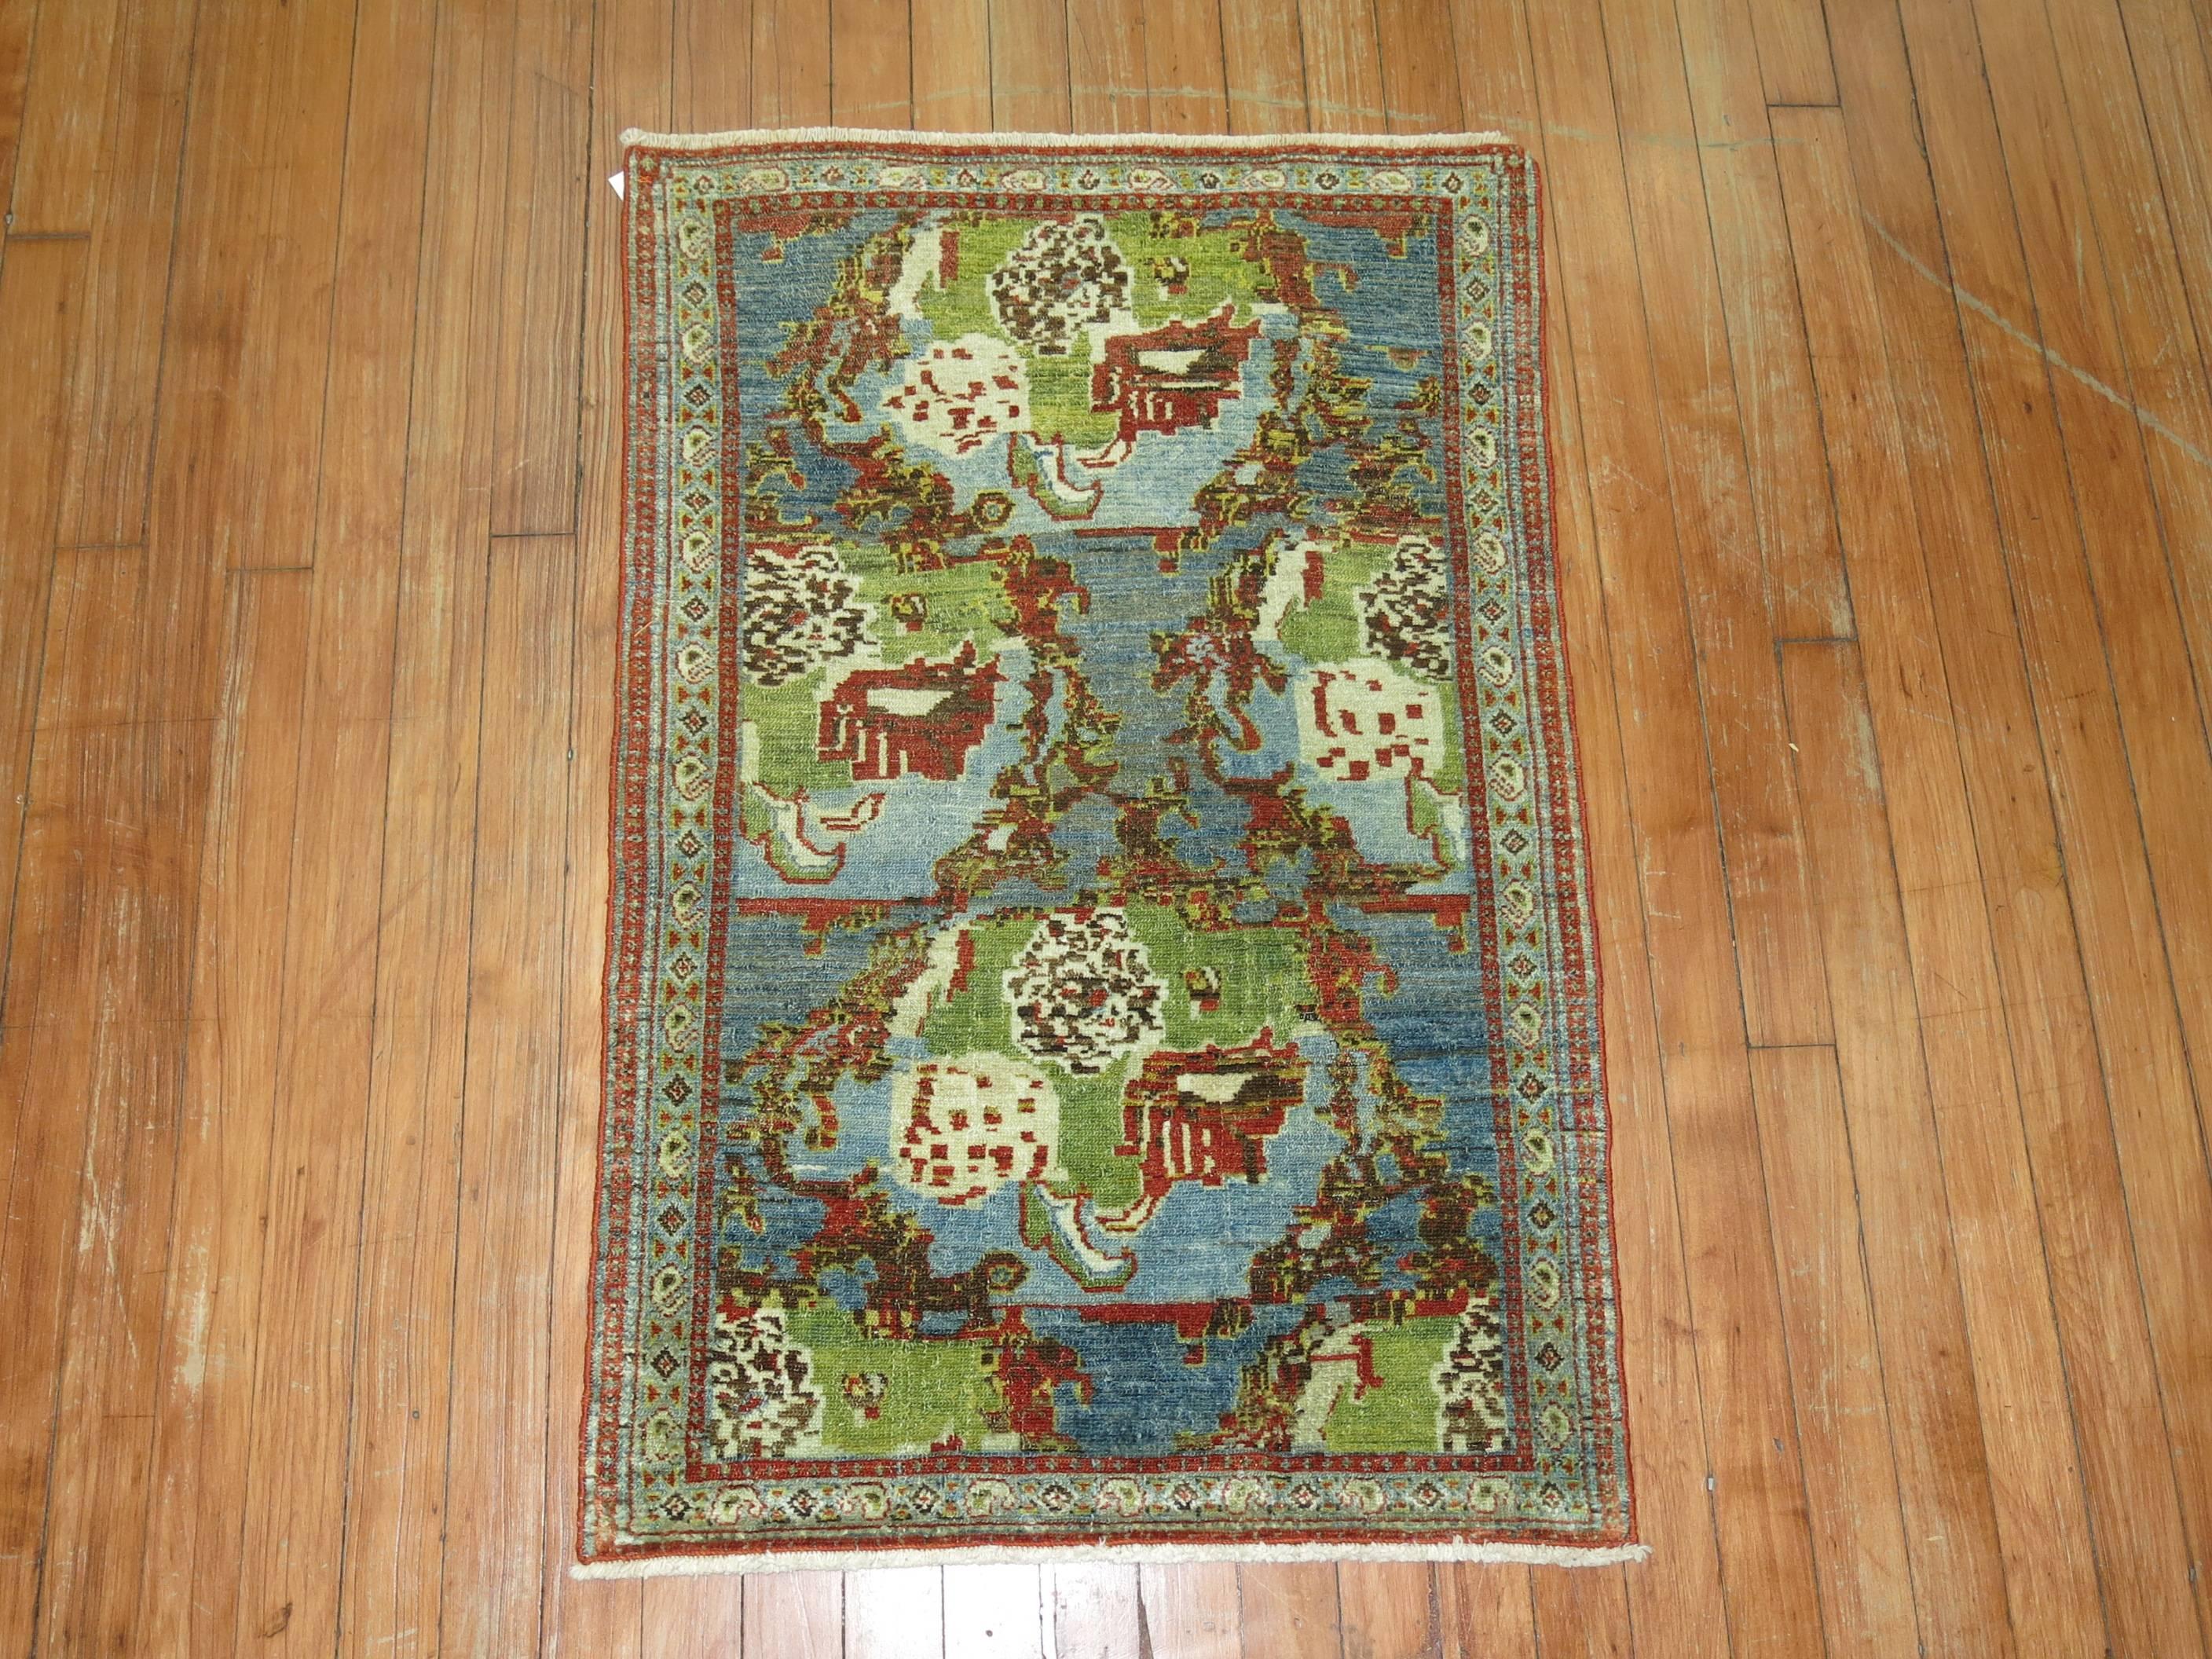 An early 20th century Persian Bidjar or Senneh rug featuring a Gol- Farang design, dominant accents in sky blue and chartreuse.

Measures: 2'1'' x 3'2''.